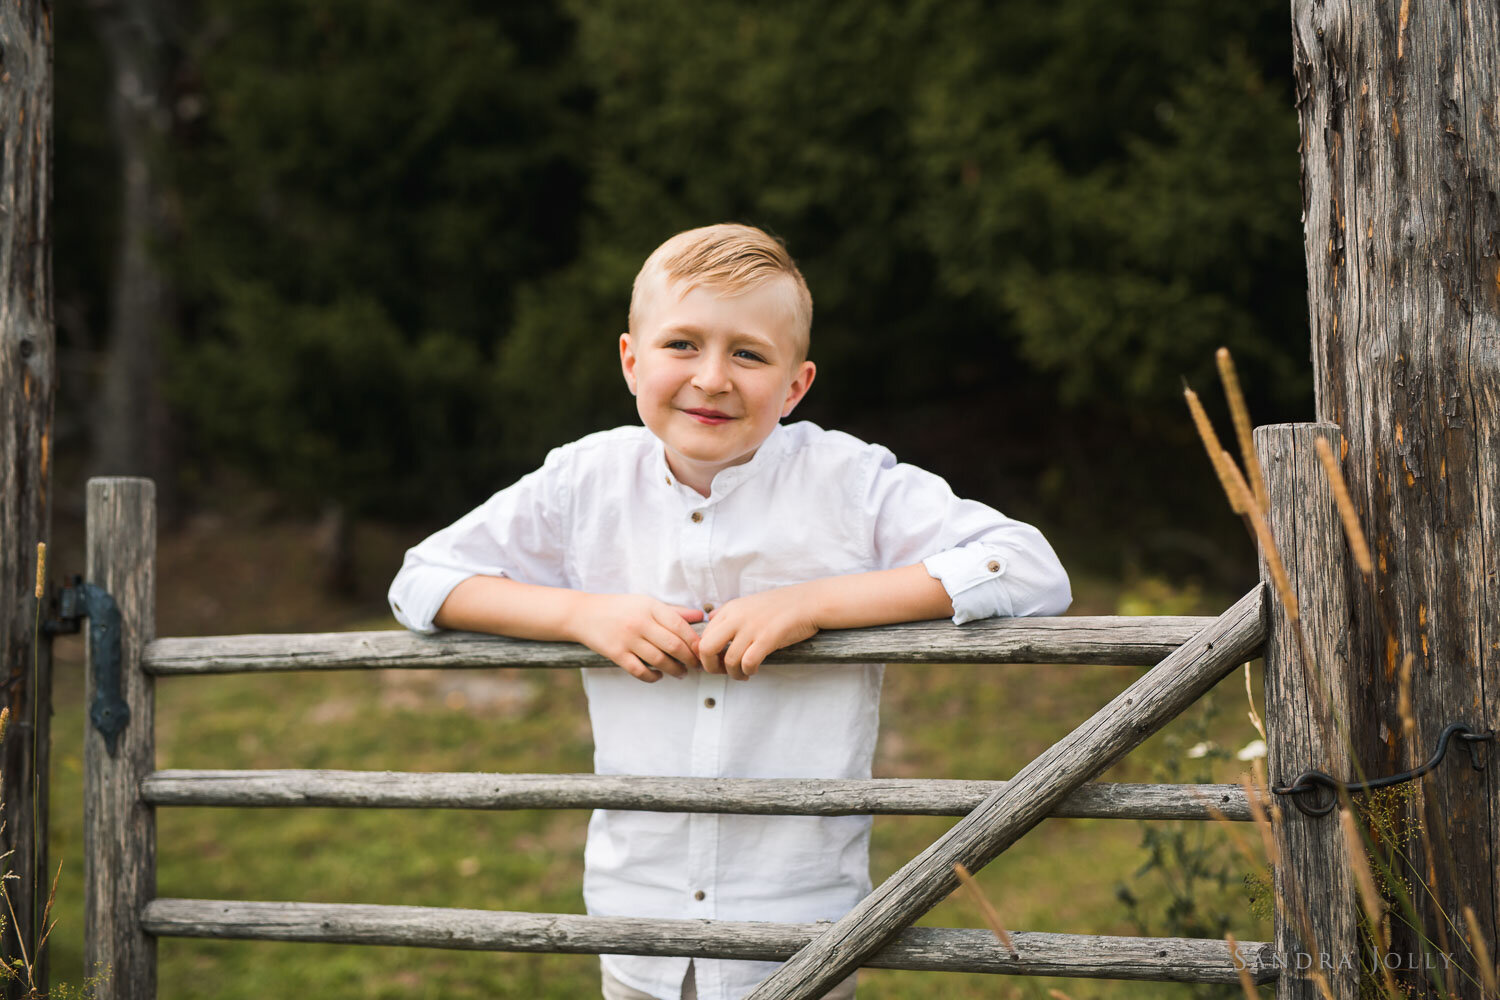 photo-of-blonde-boy-at-wooden-gate-by-stockholm-photographer-sandra-jolly.jpg